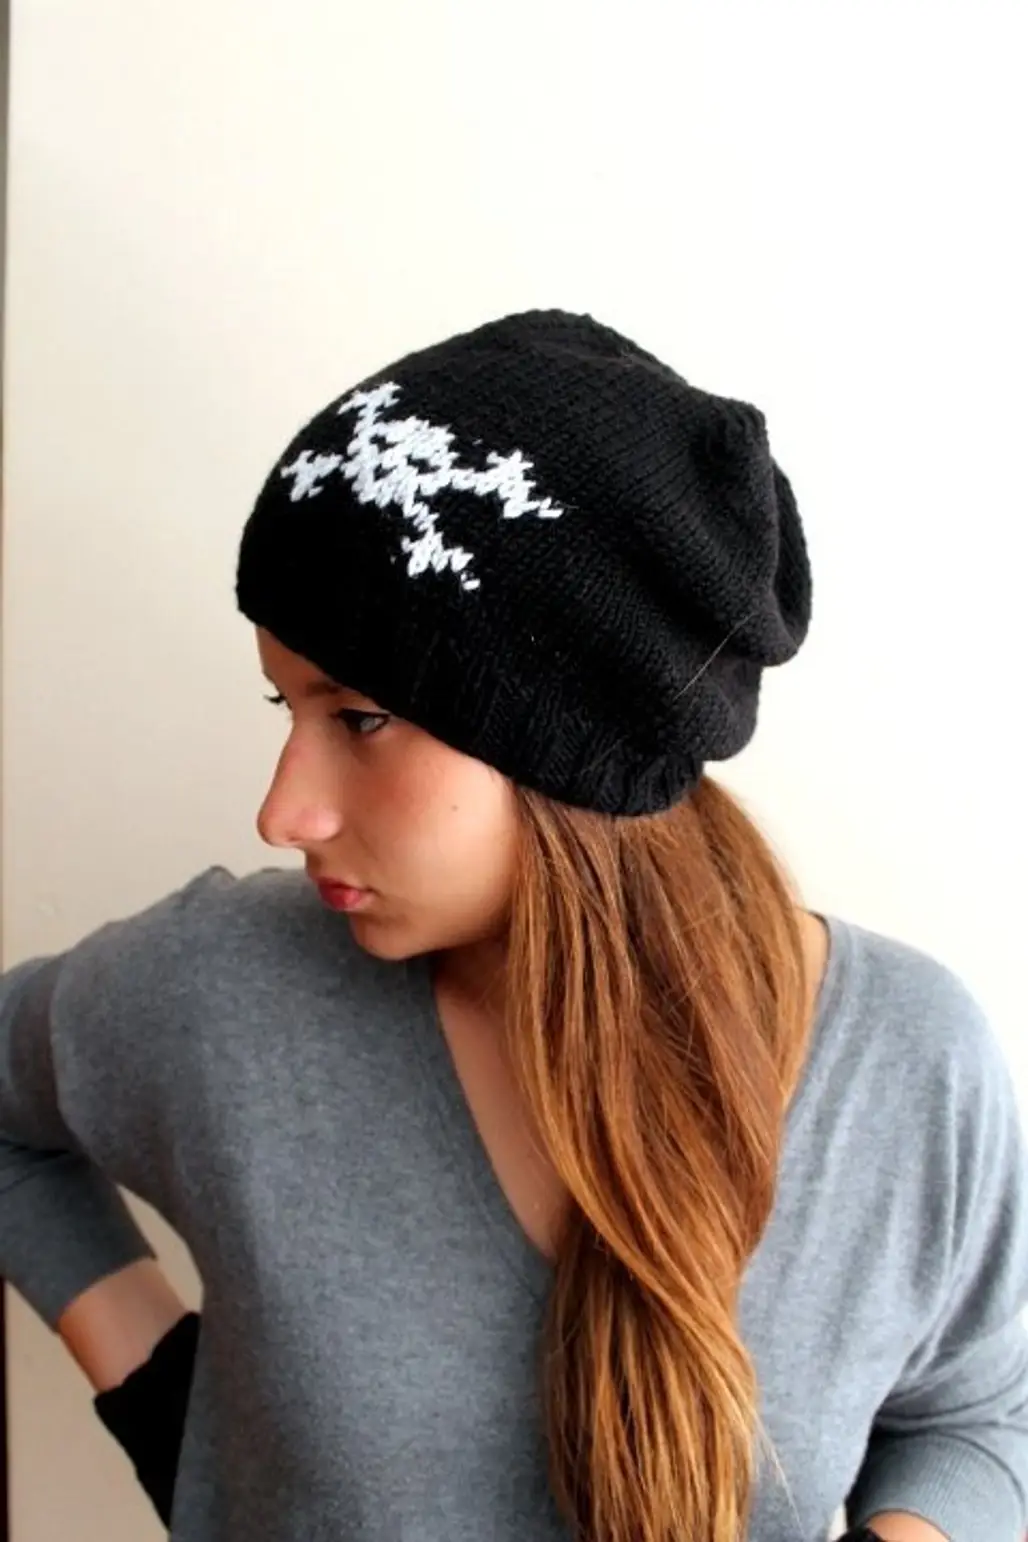 Skull Knit Hat in Black and White